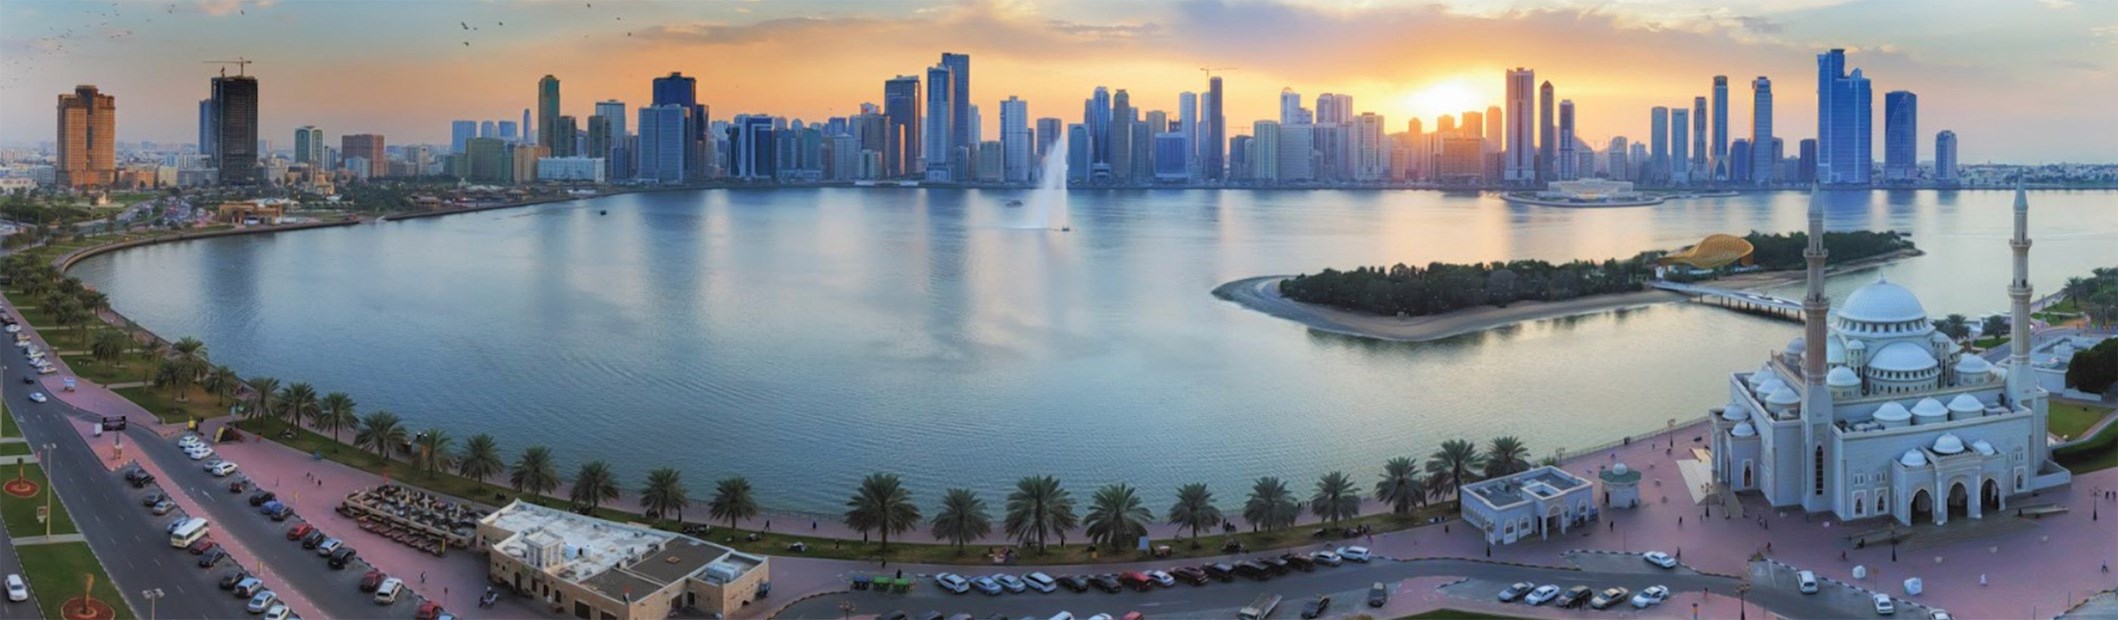 Gulf News: Sharjah plugs the gaps in real estate